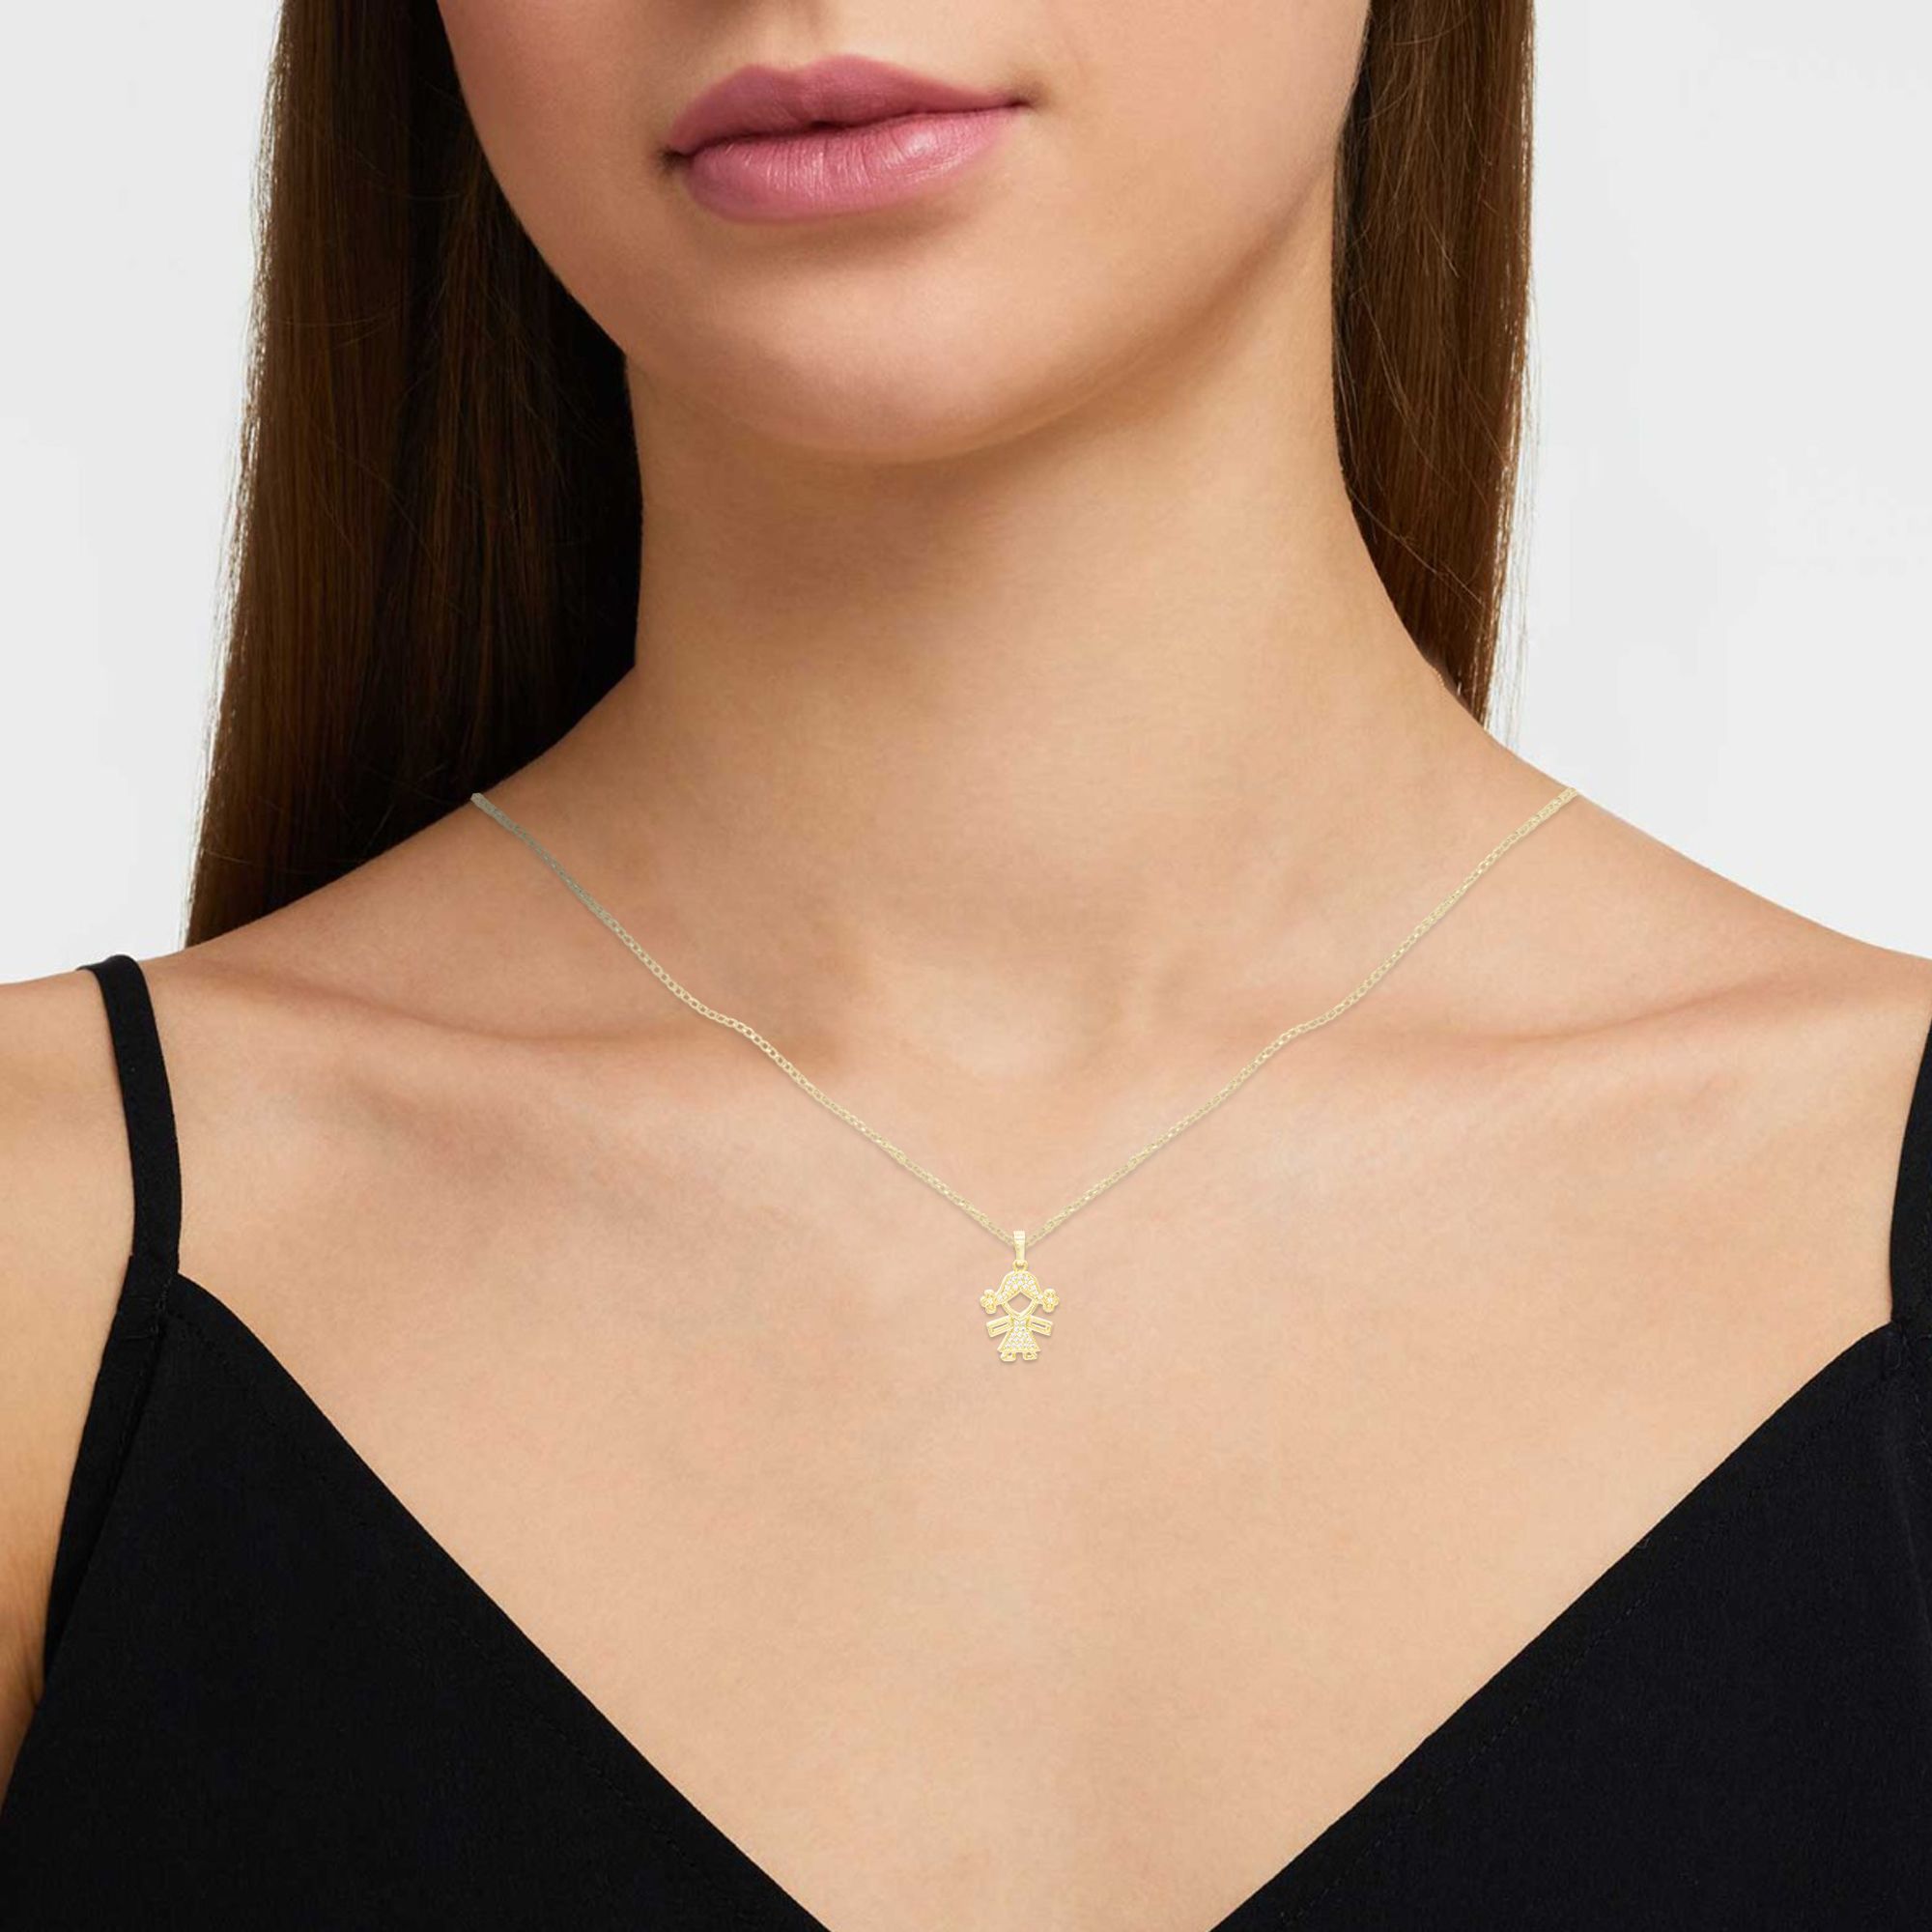 Girl Cubic Zirconia Pendant With Necklace Set 14K Gold Filled